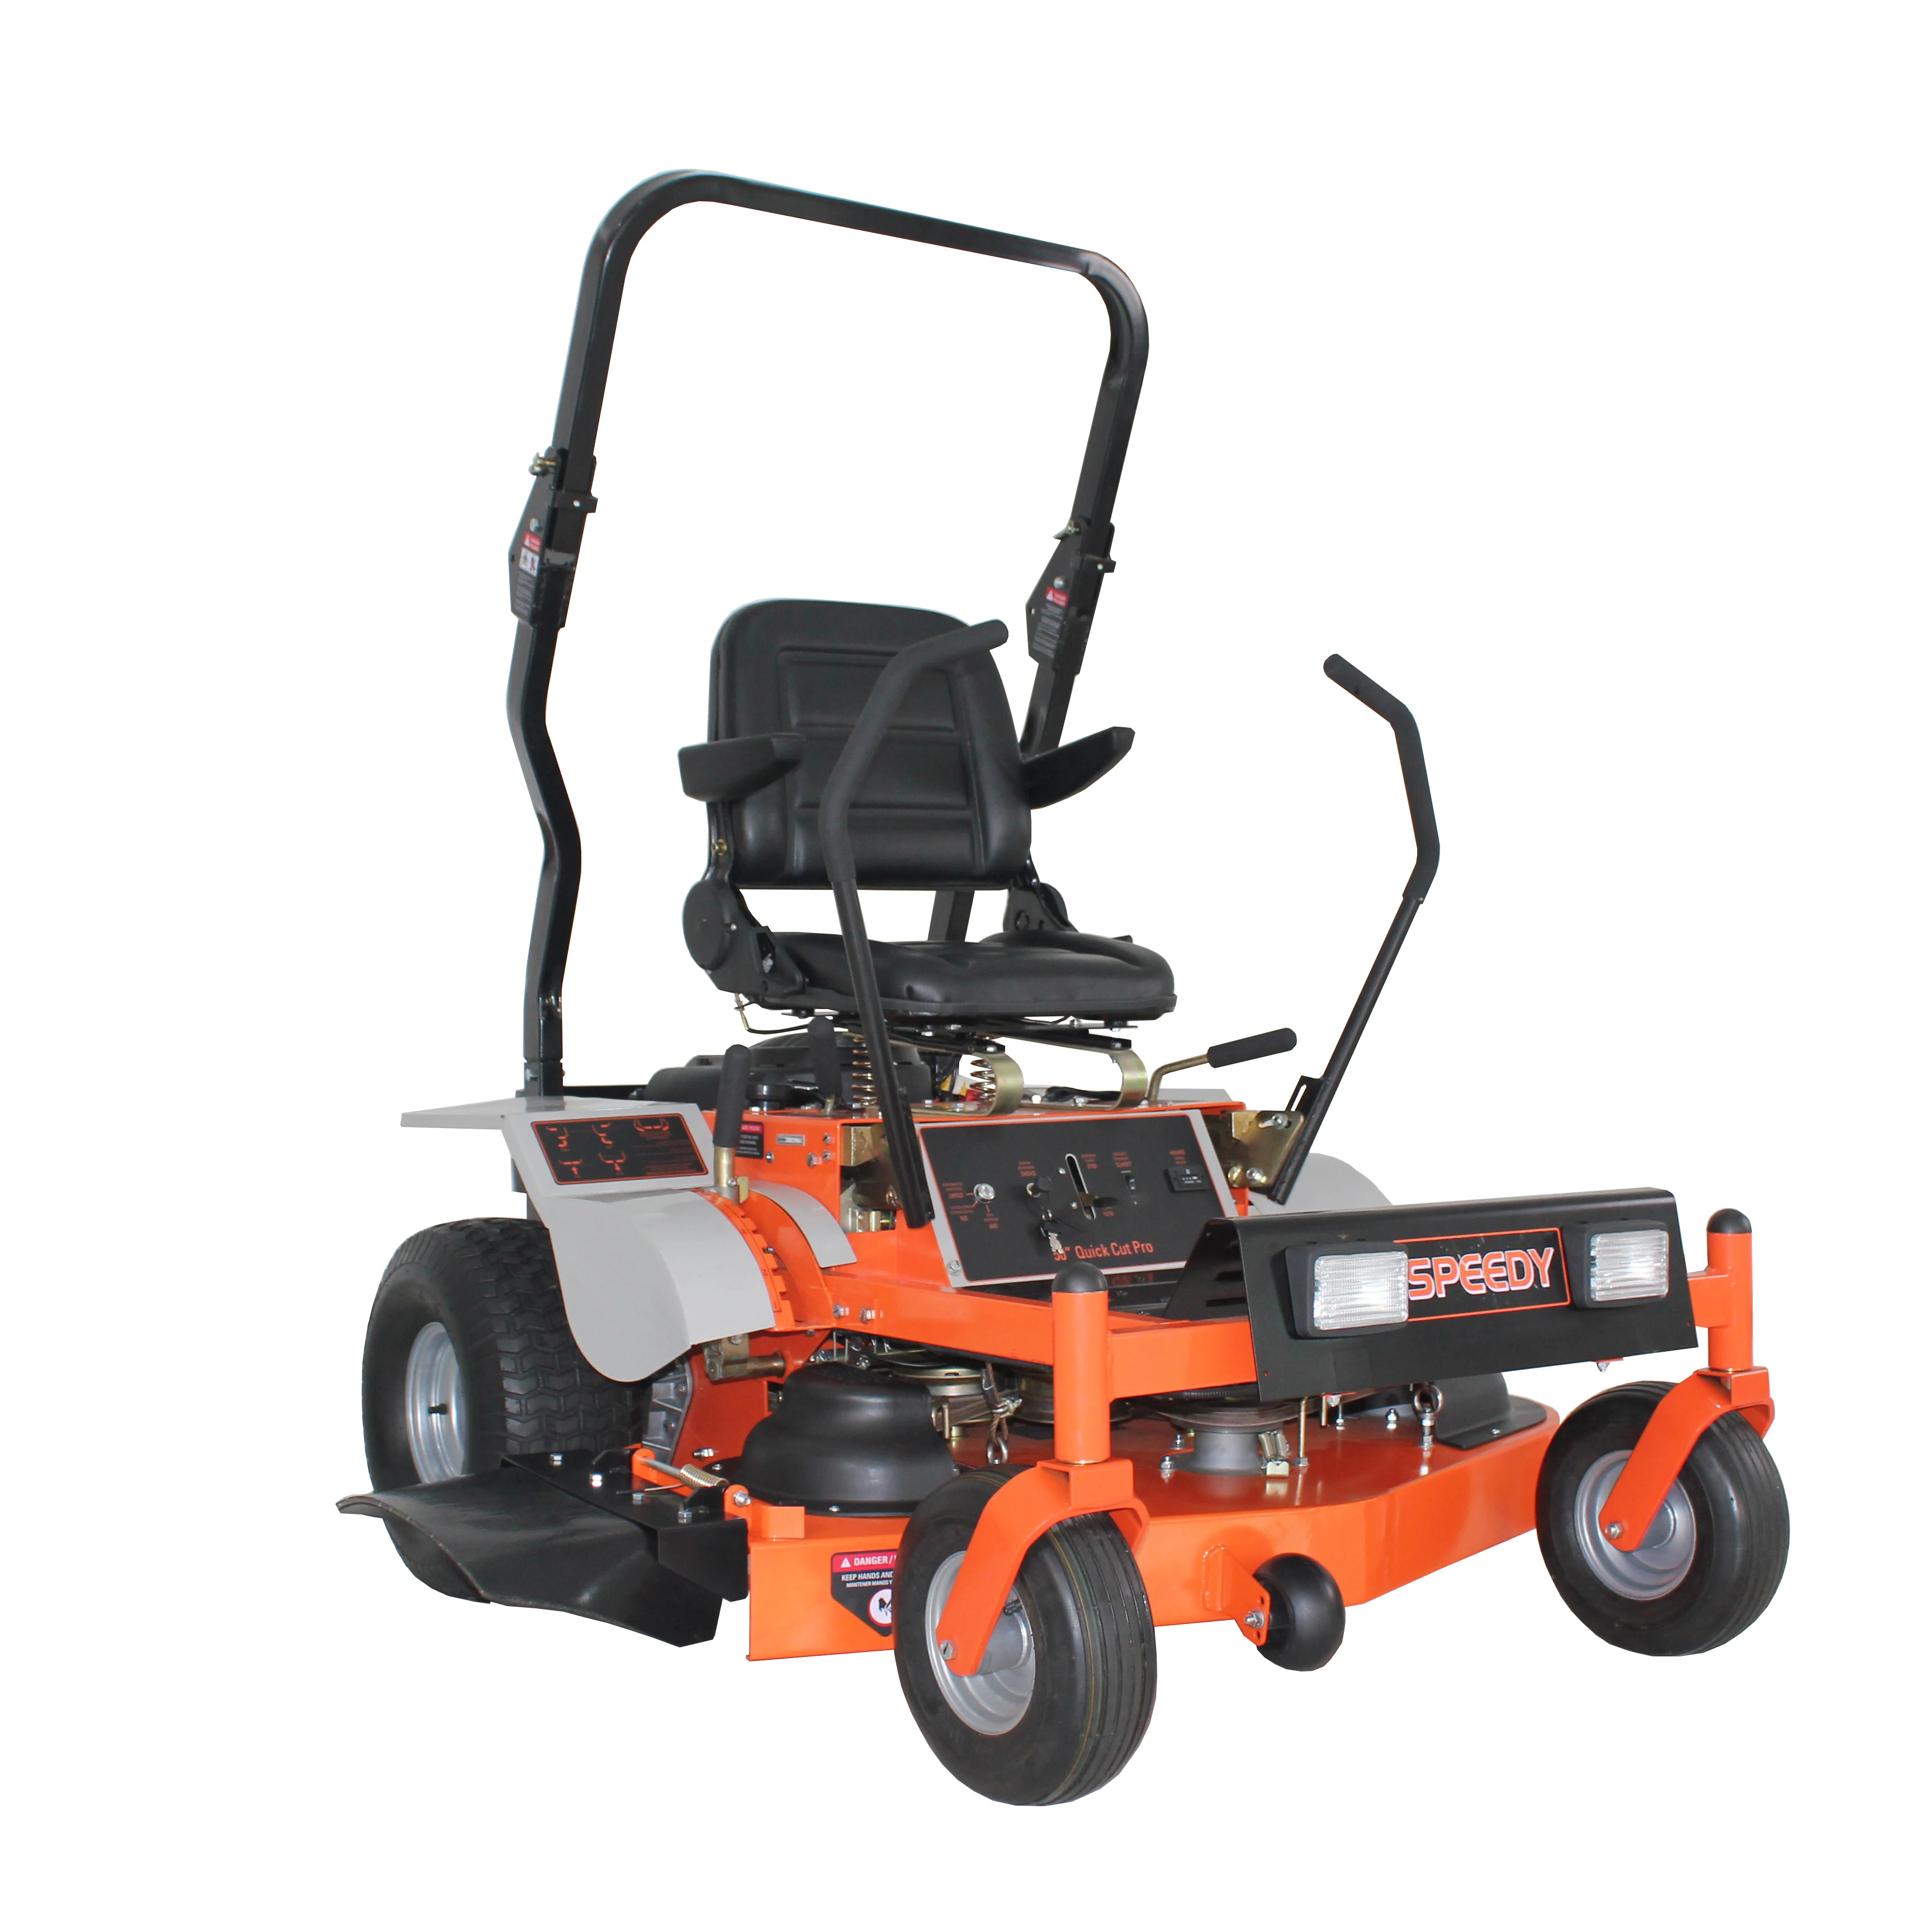 Beast 50 656cc 20 Hp Gas Powered By Briggs And Stratton 58 Off